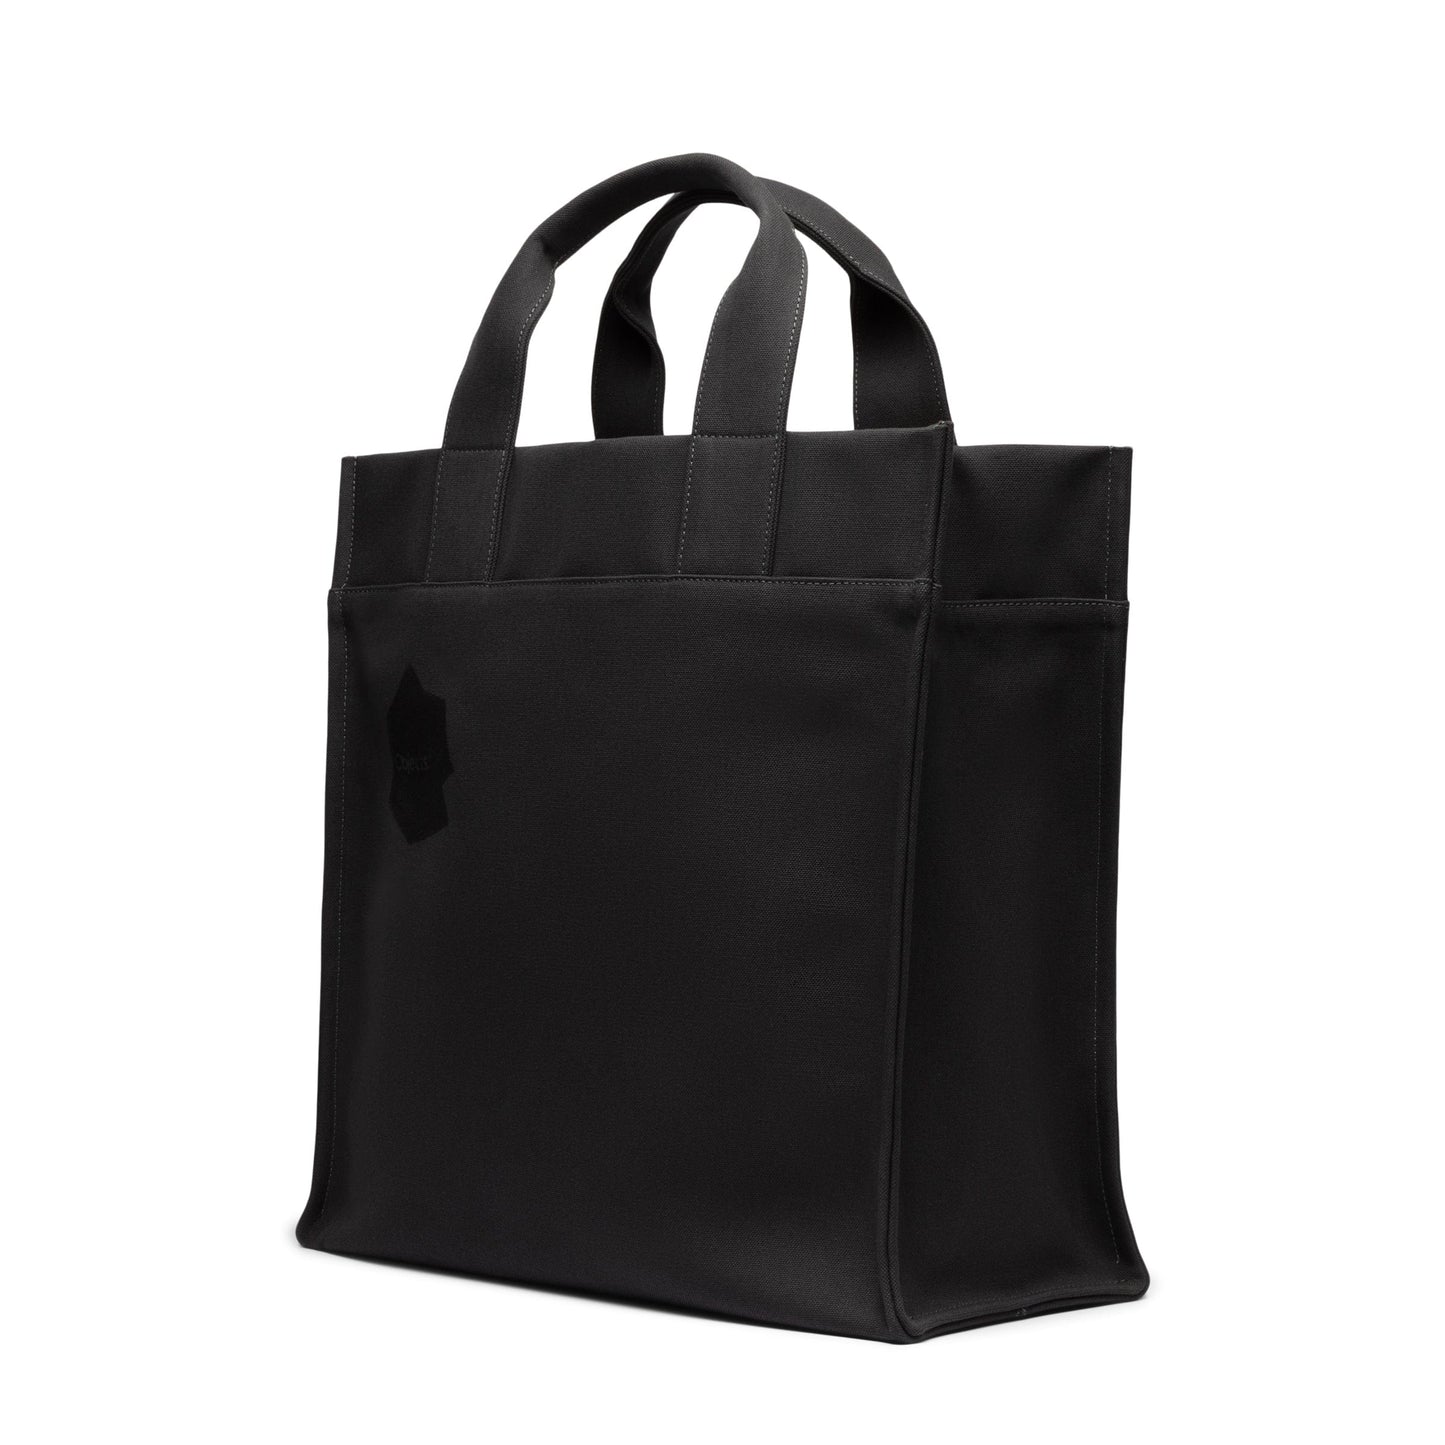 Objects IV Life Bags ANTHRACITE GREY ANGRY / O/S TOTE BAG